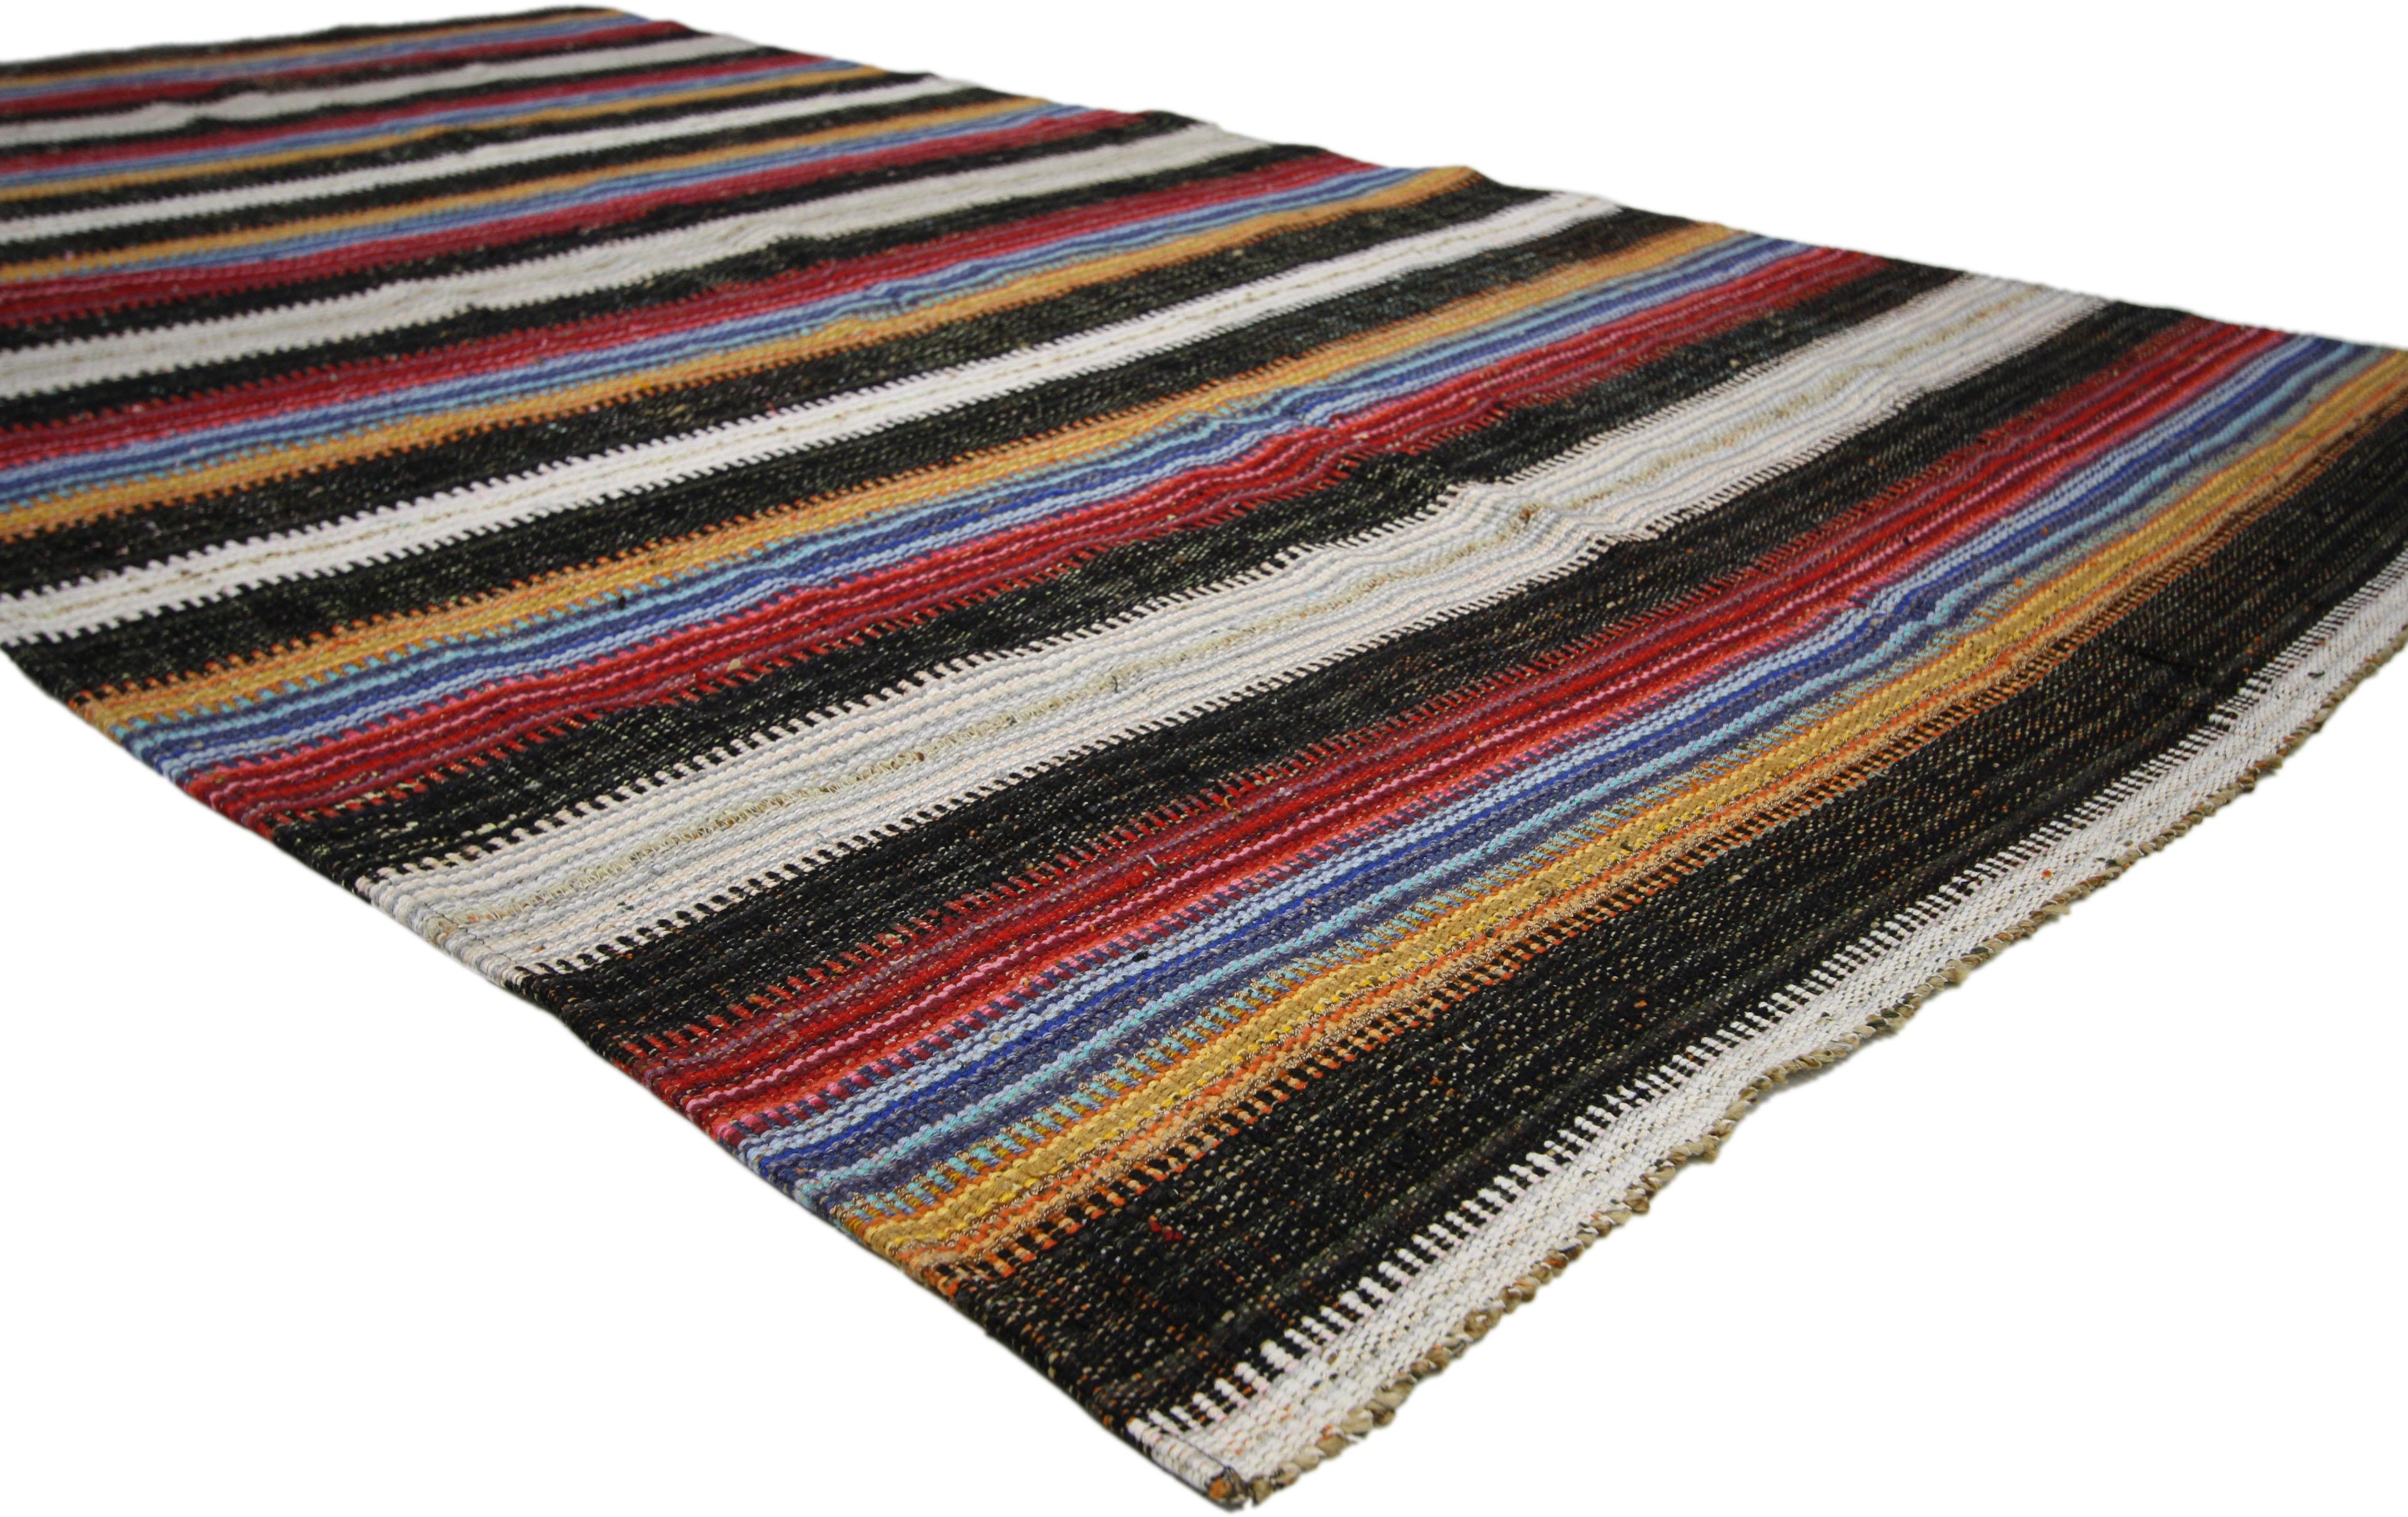 ​60677 Vintage Turkish Jajim Striped Kilim Area Rug with Modern American Colonial Style 04'09 x 08'10. ​This handwoven wool vintage Turkish Kilim Jajim Kilim rug features a variety of colorful stripes composed of both wide and narrow bands forming a